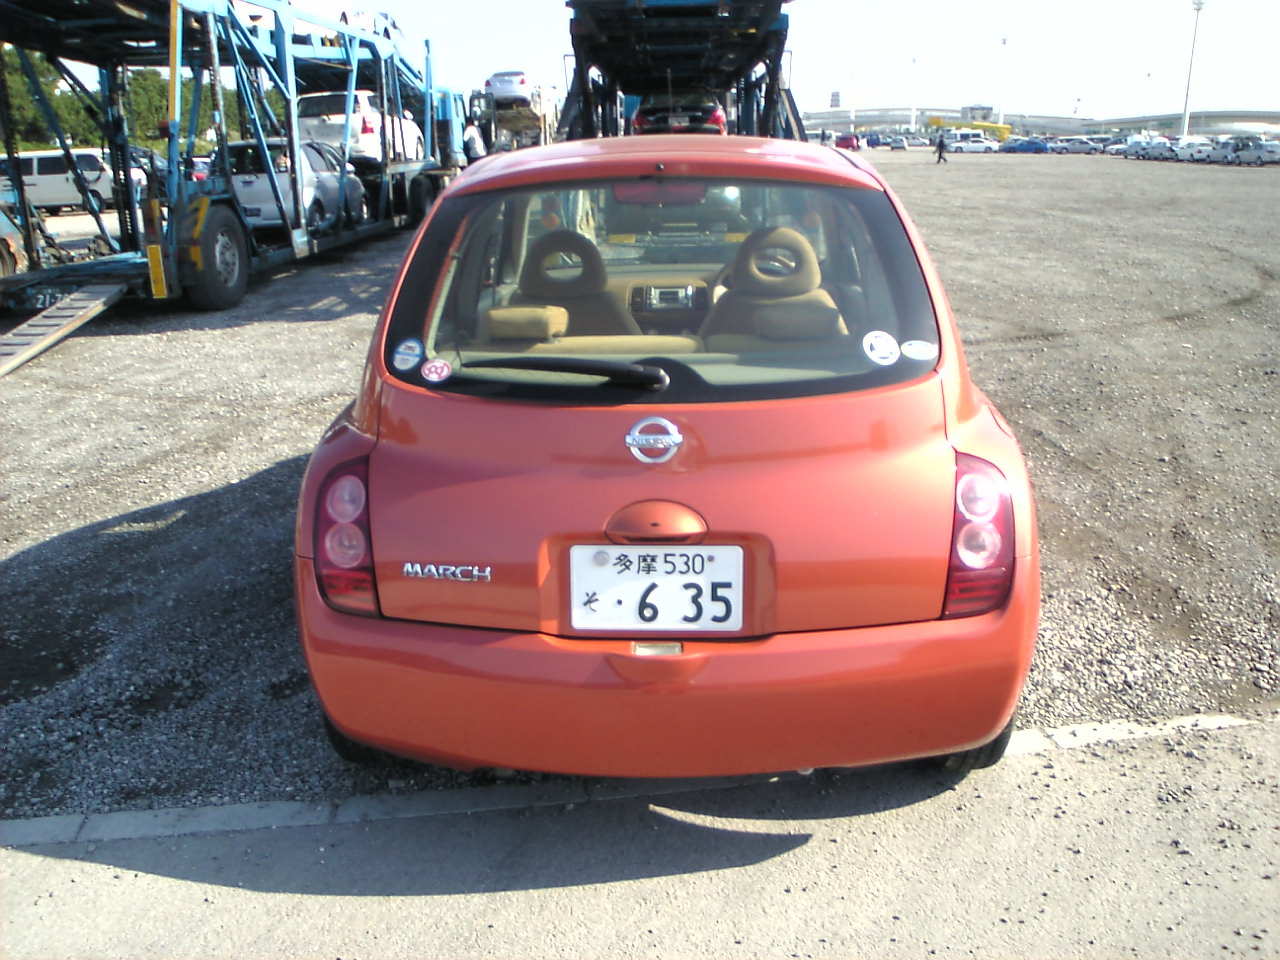 Nissan march 2003 reviews #10